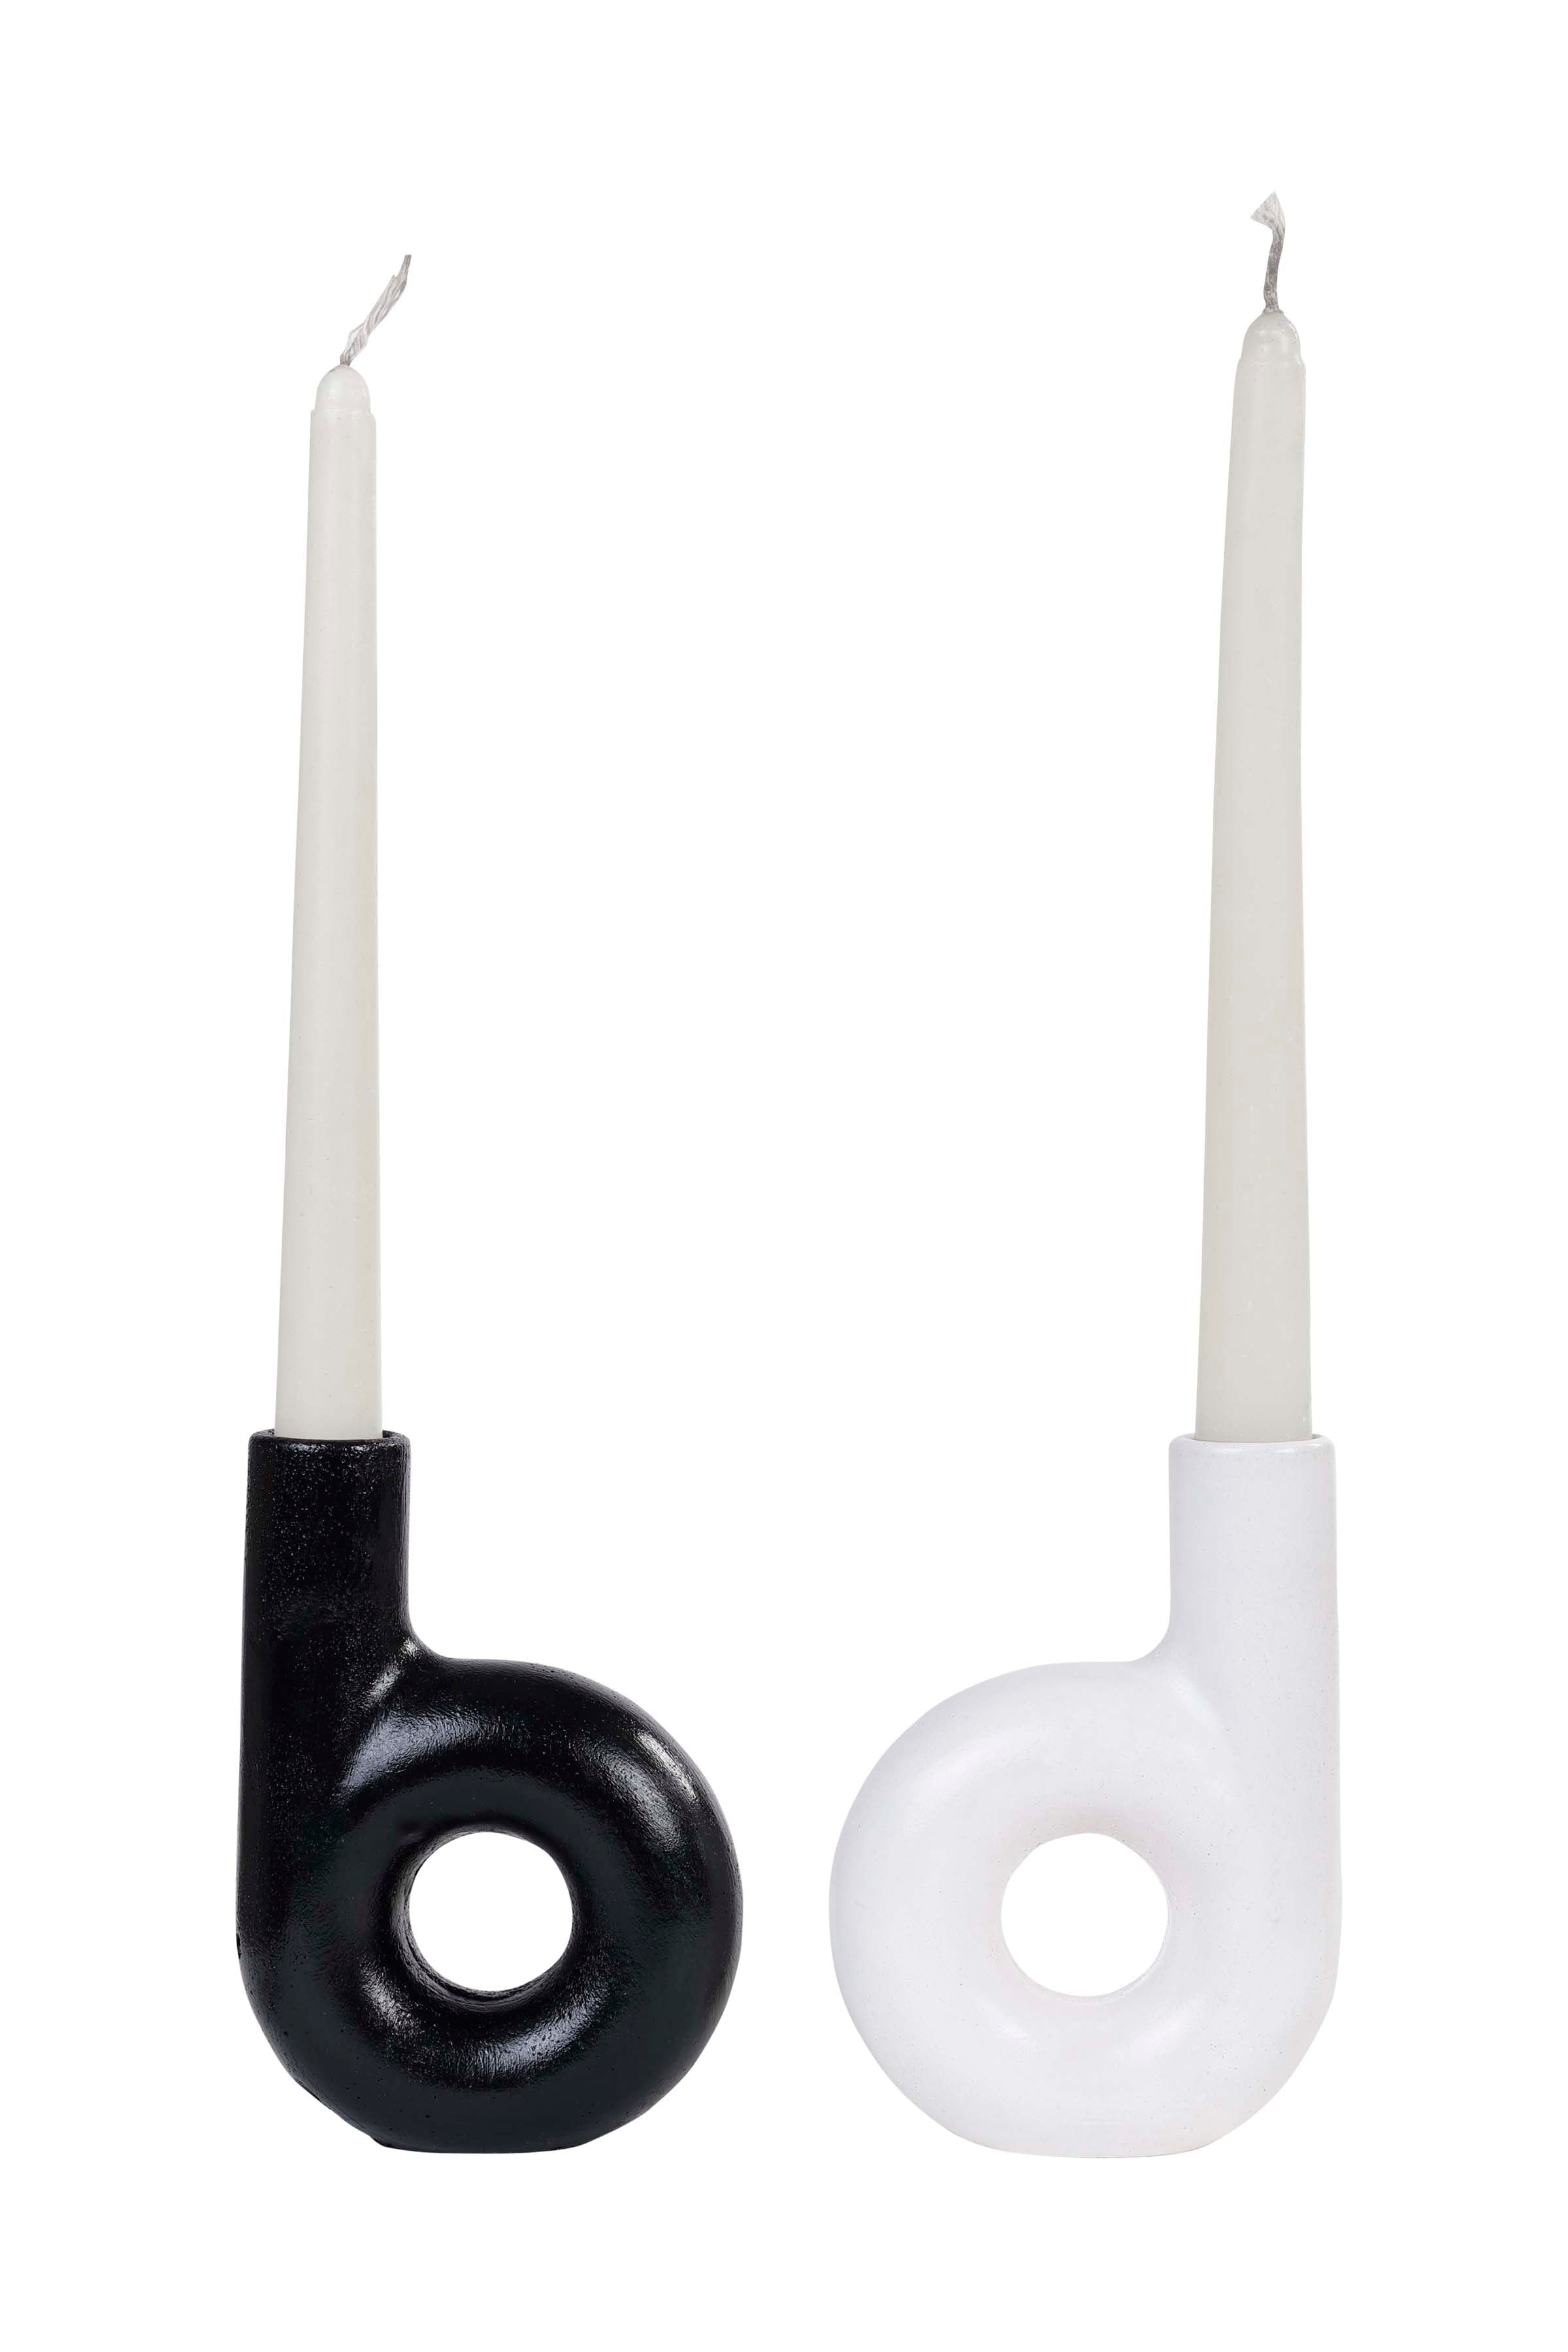 "D" Style Nordic Concrete Candle Holder - Black (Set of 2)